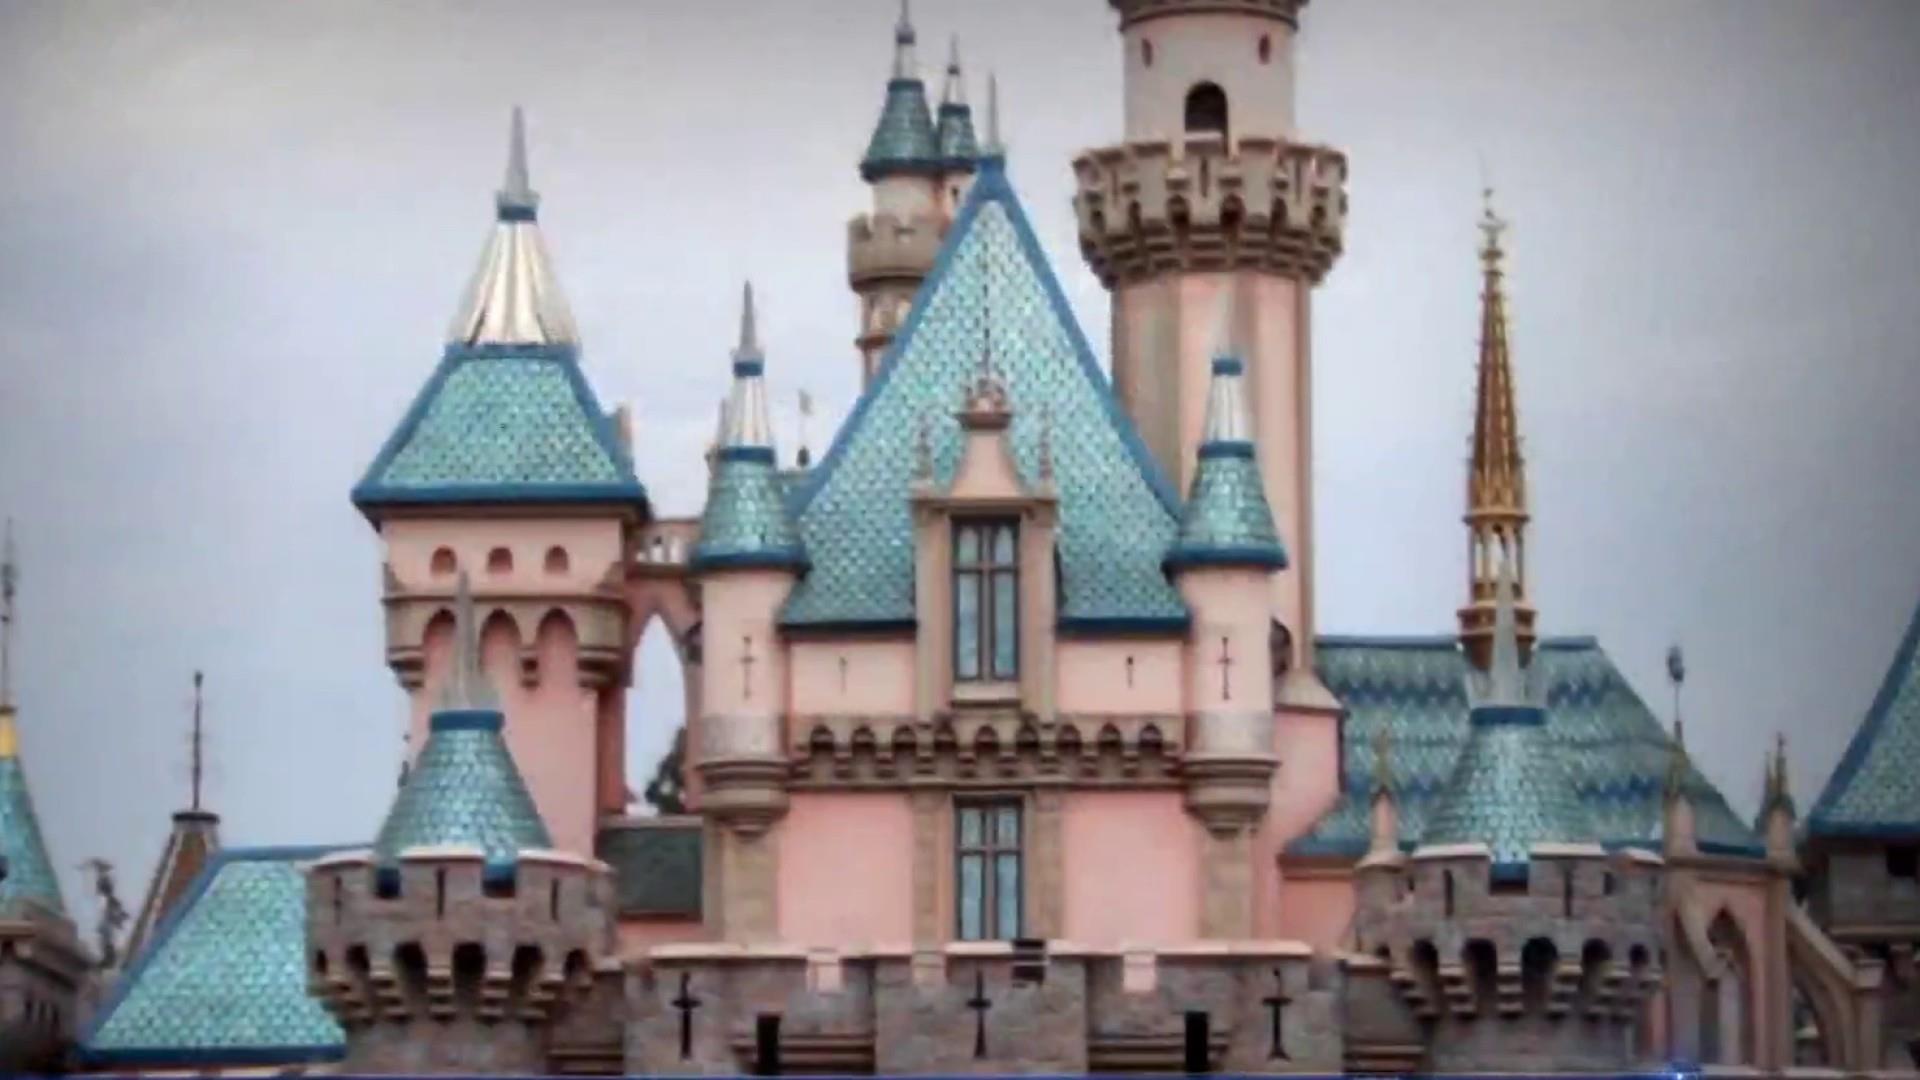 Power outage hits Disneyland during busy season